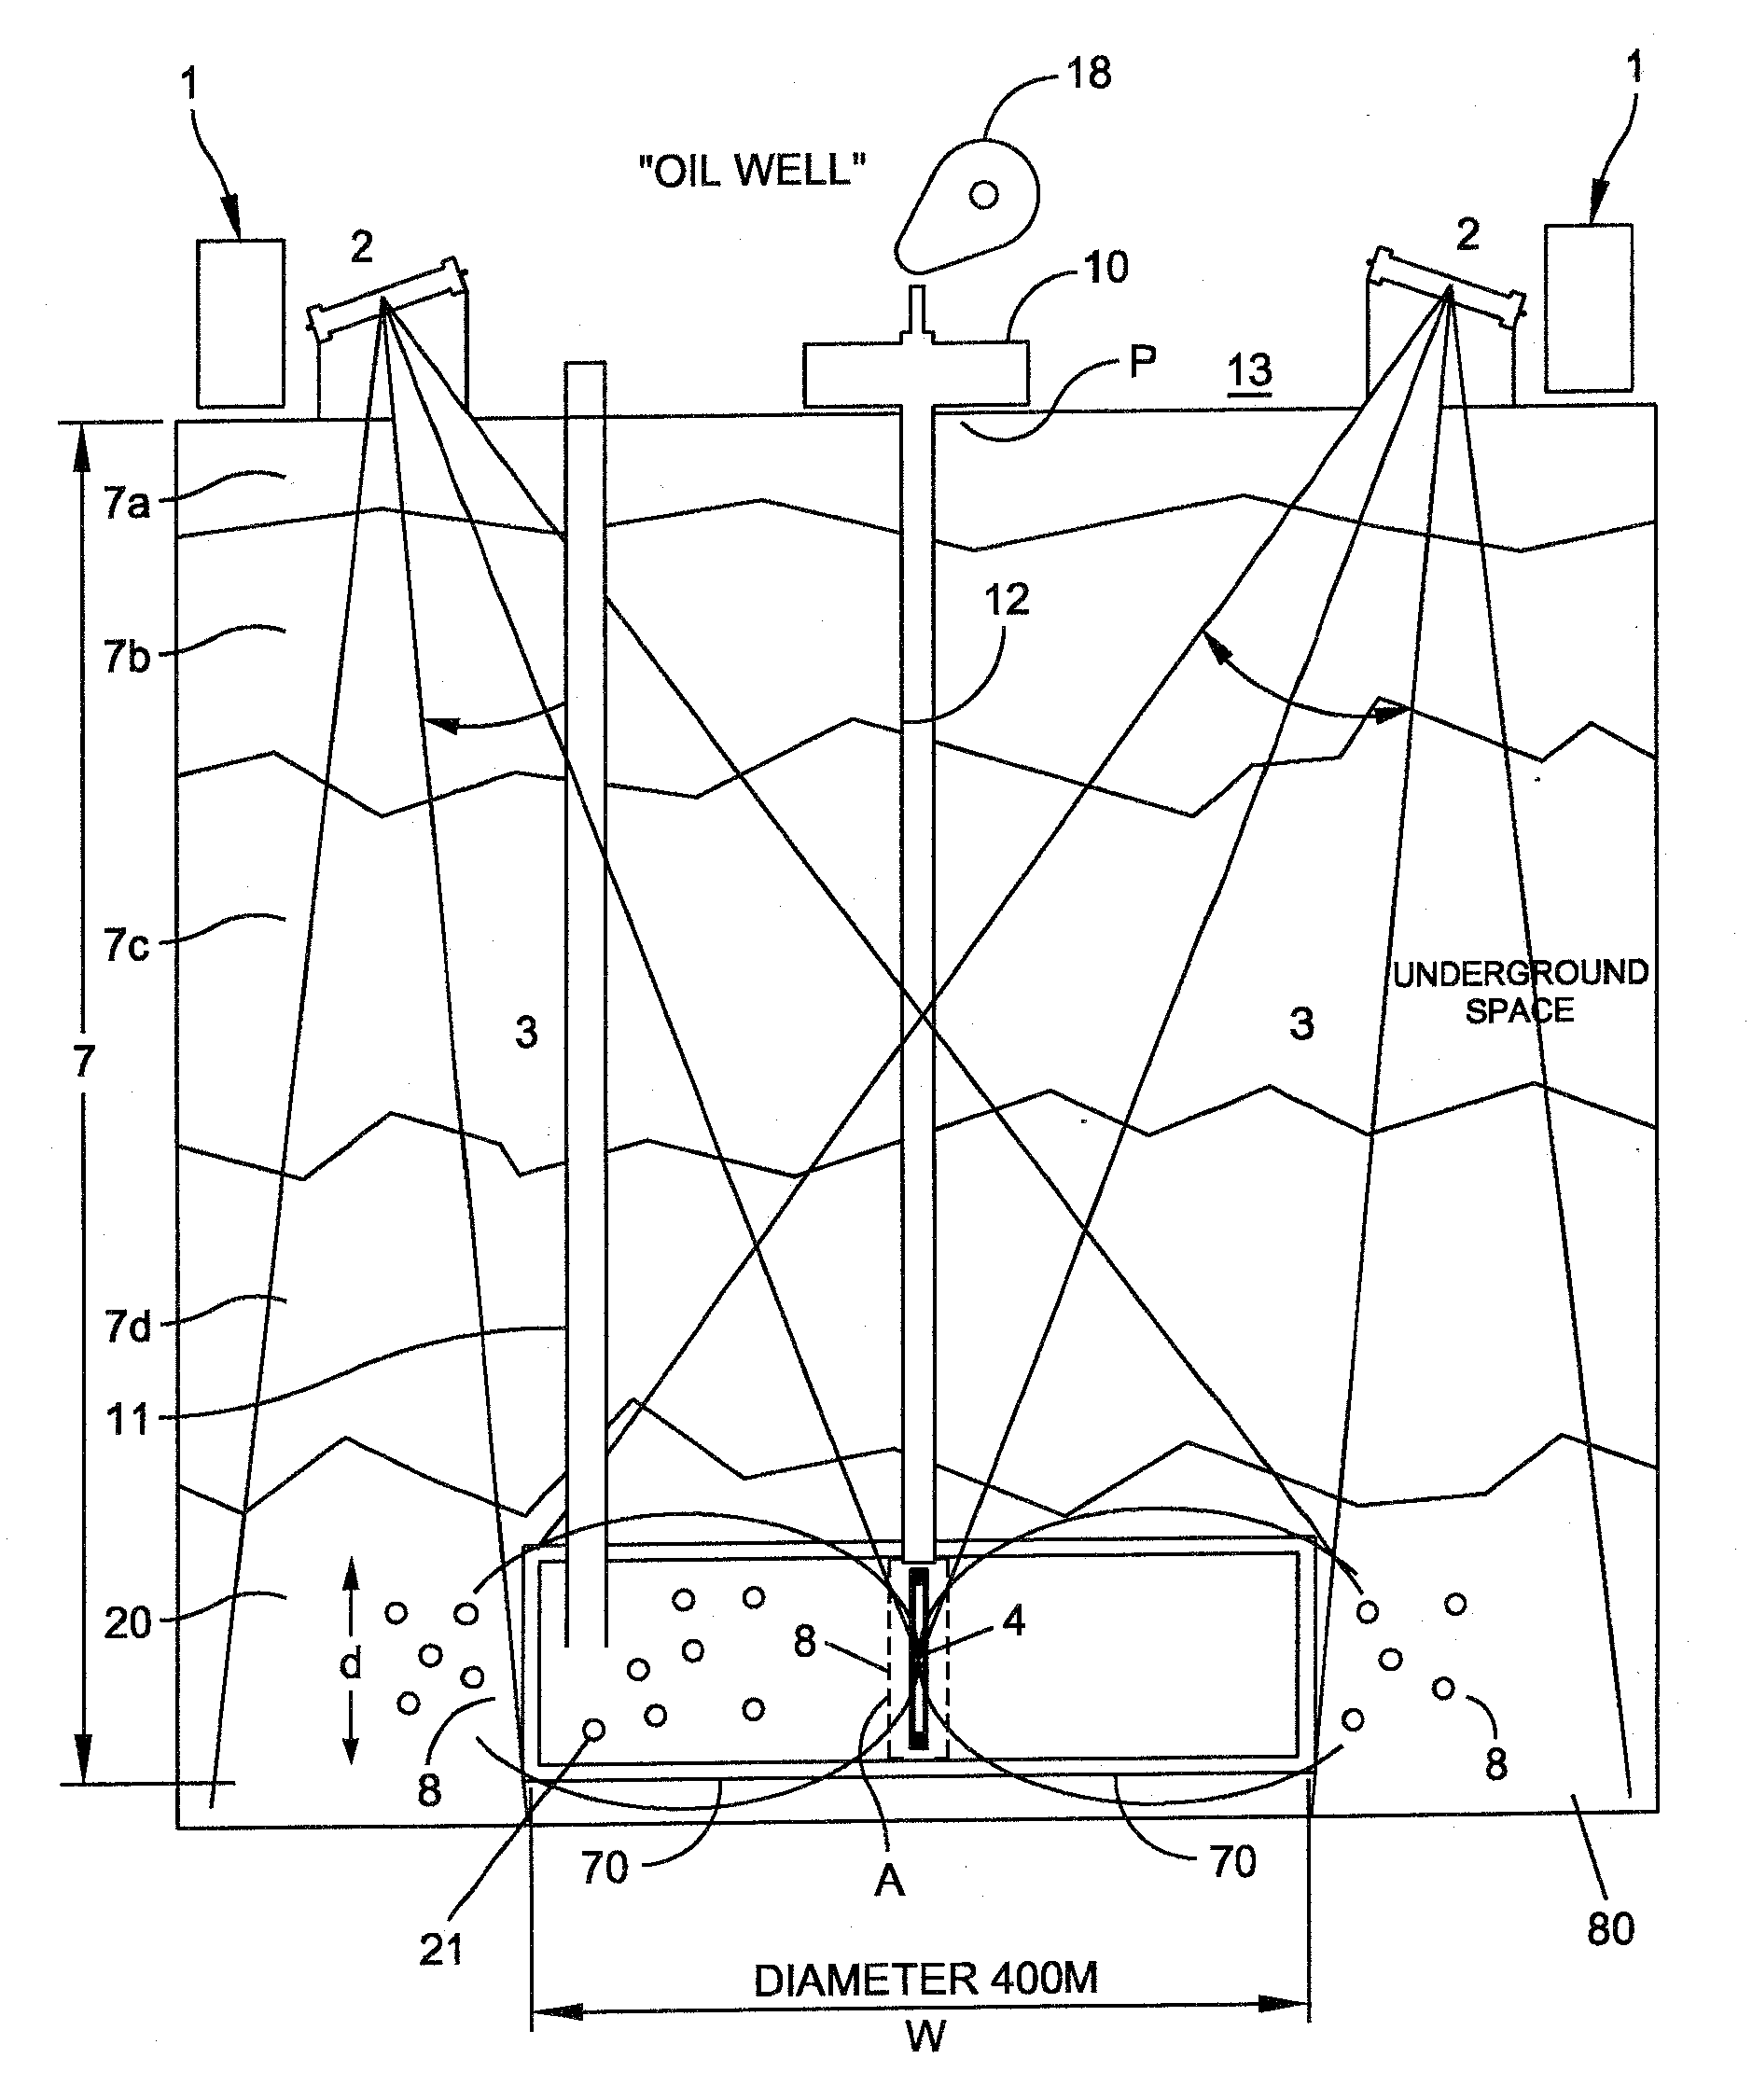 System and method to remotely interact with NANO devices in an oil well and/or water reservoir using electromagnetic transmission